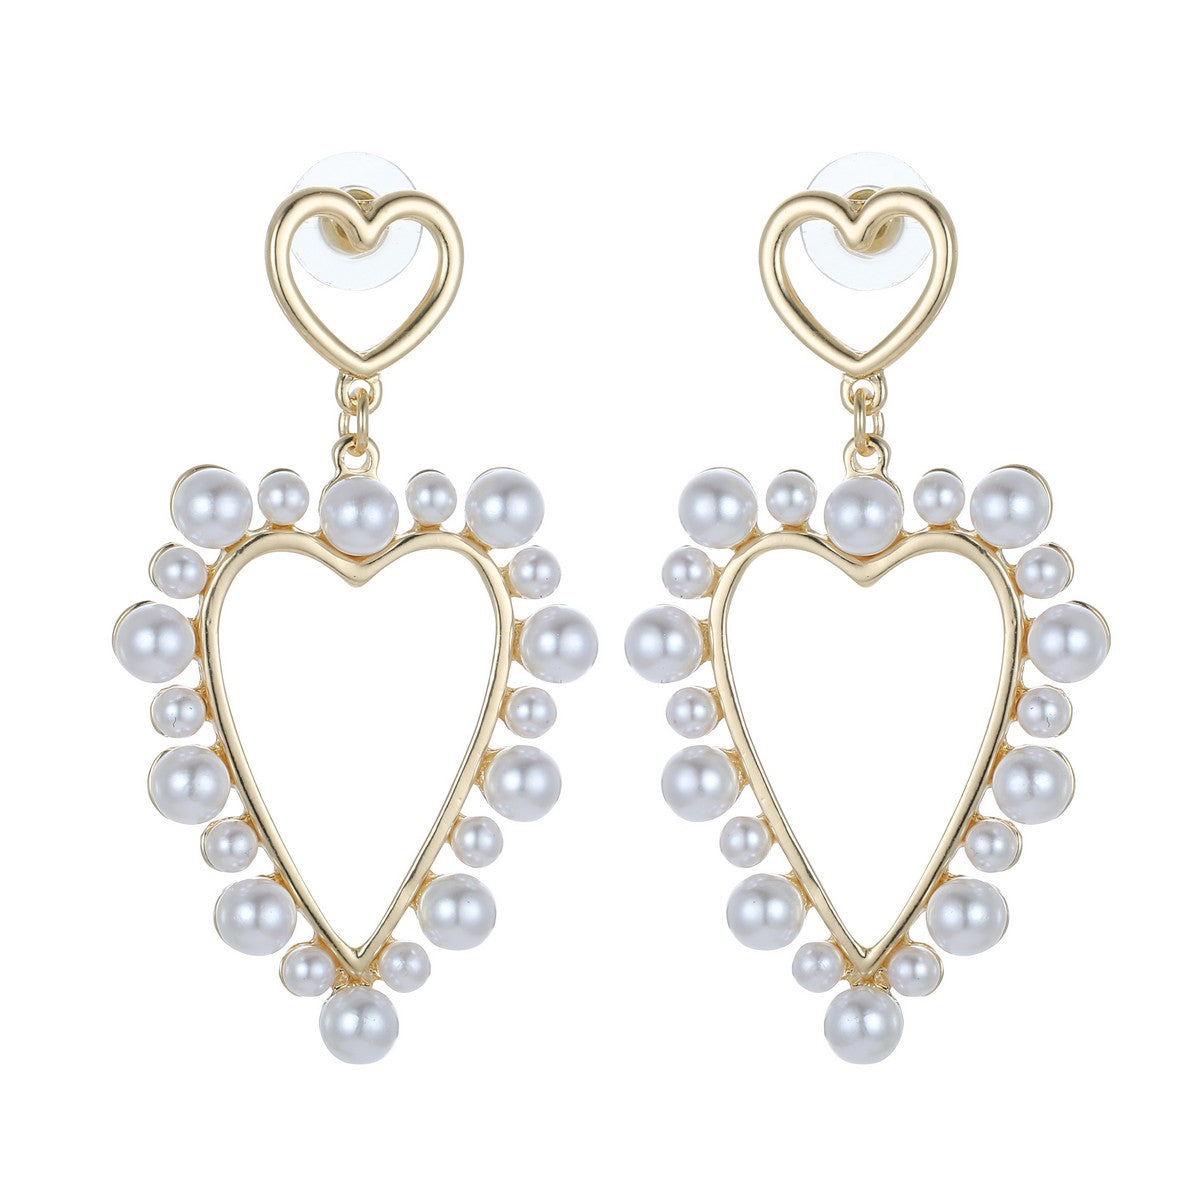 Gold Heart Earrings with Pear Beads  YT22801YGD